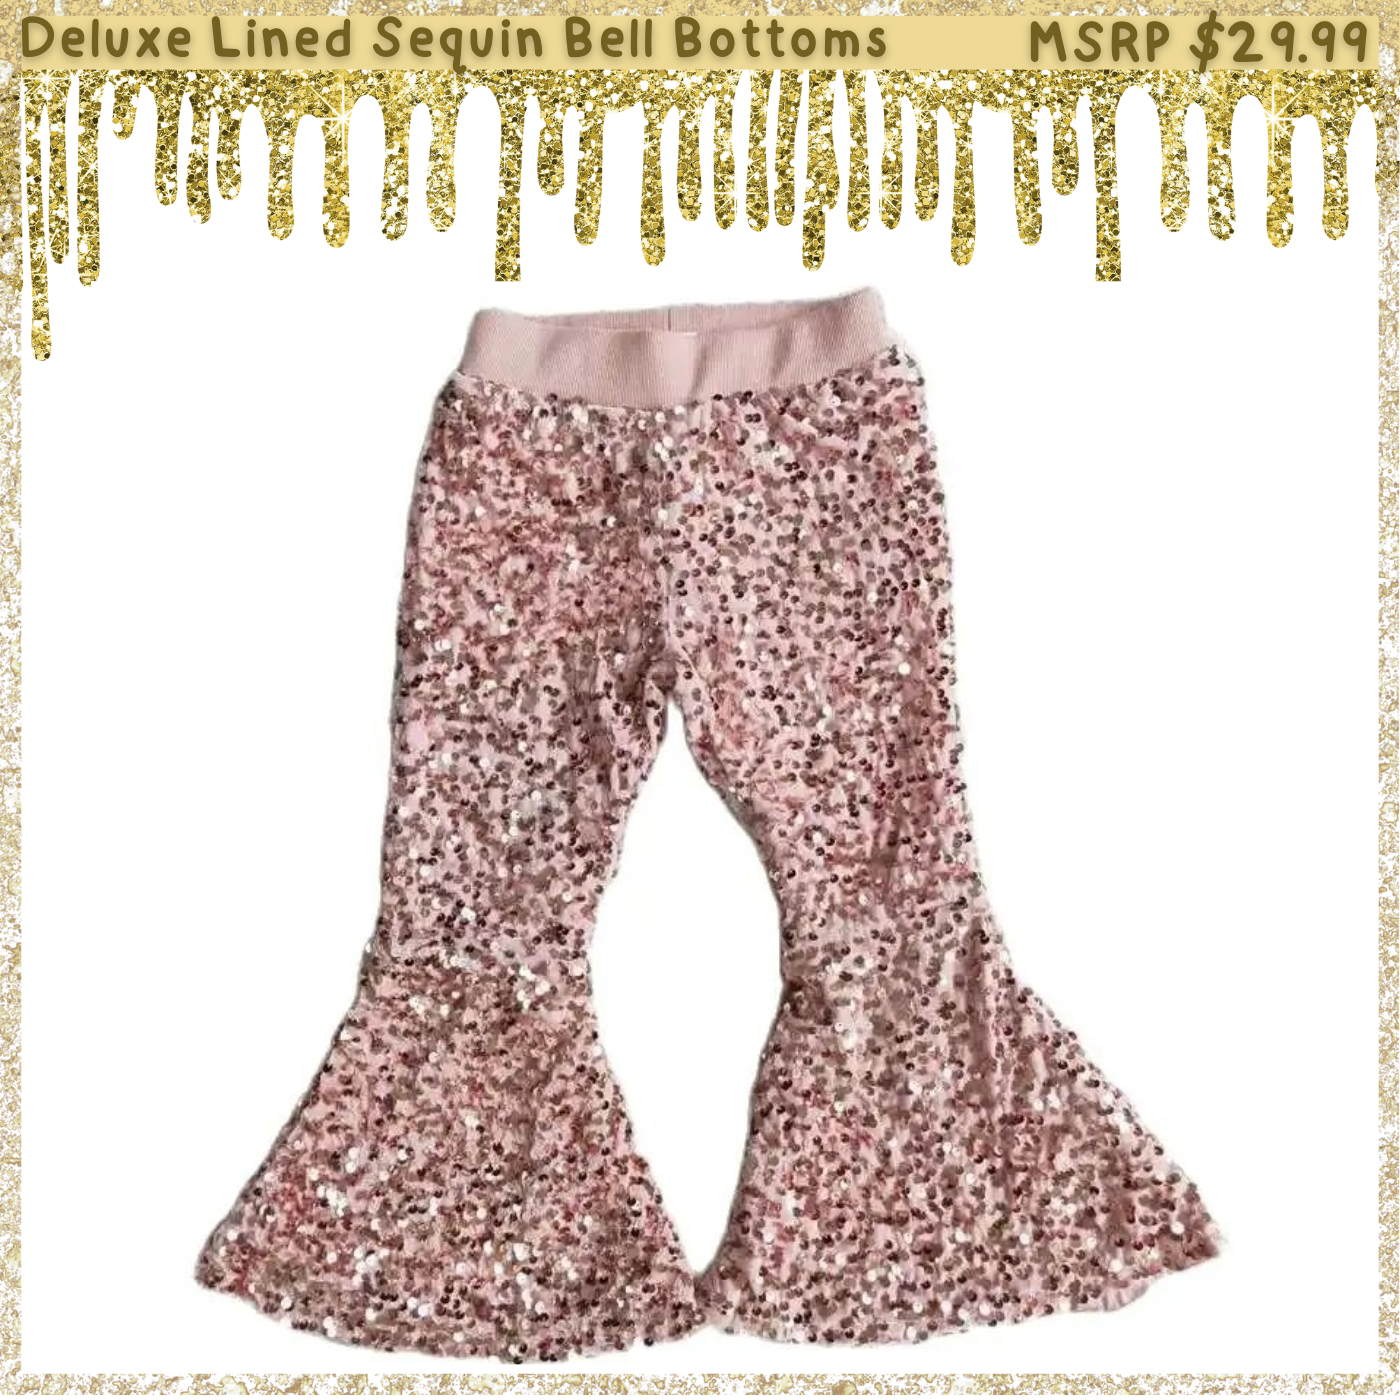 GLAMOROUS 4-Pack: Girls Deluxe Lined Sequin Bell Bottoms (Flare Pants)